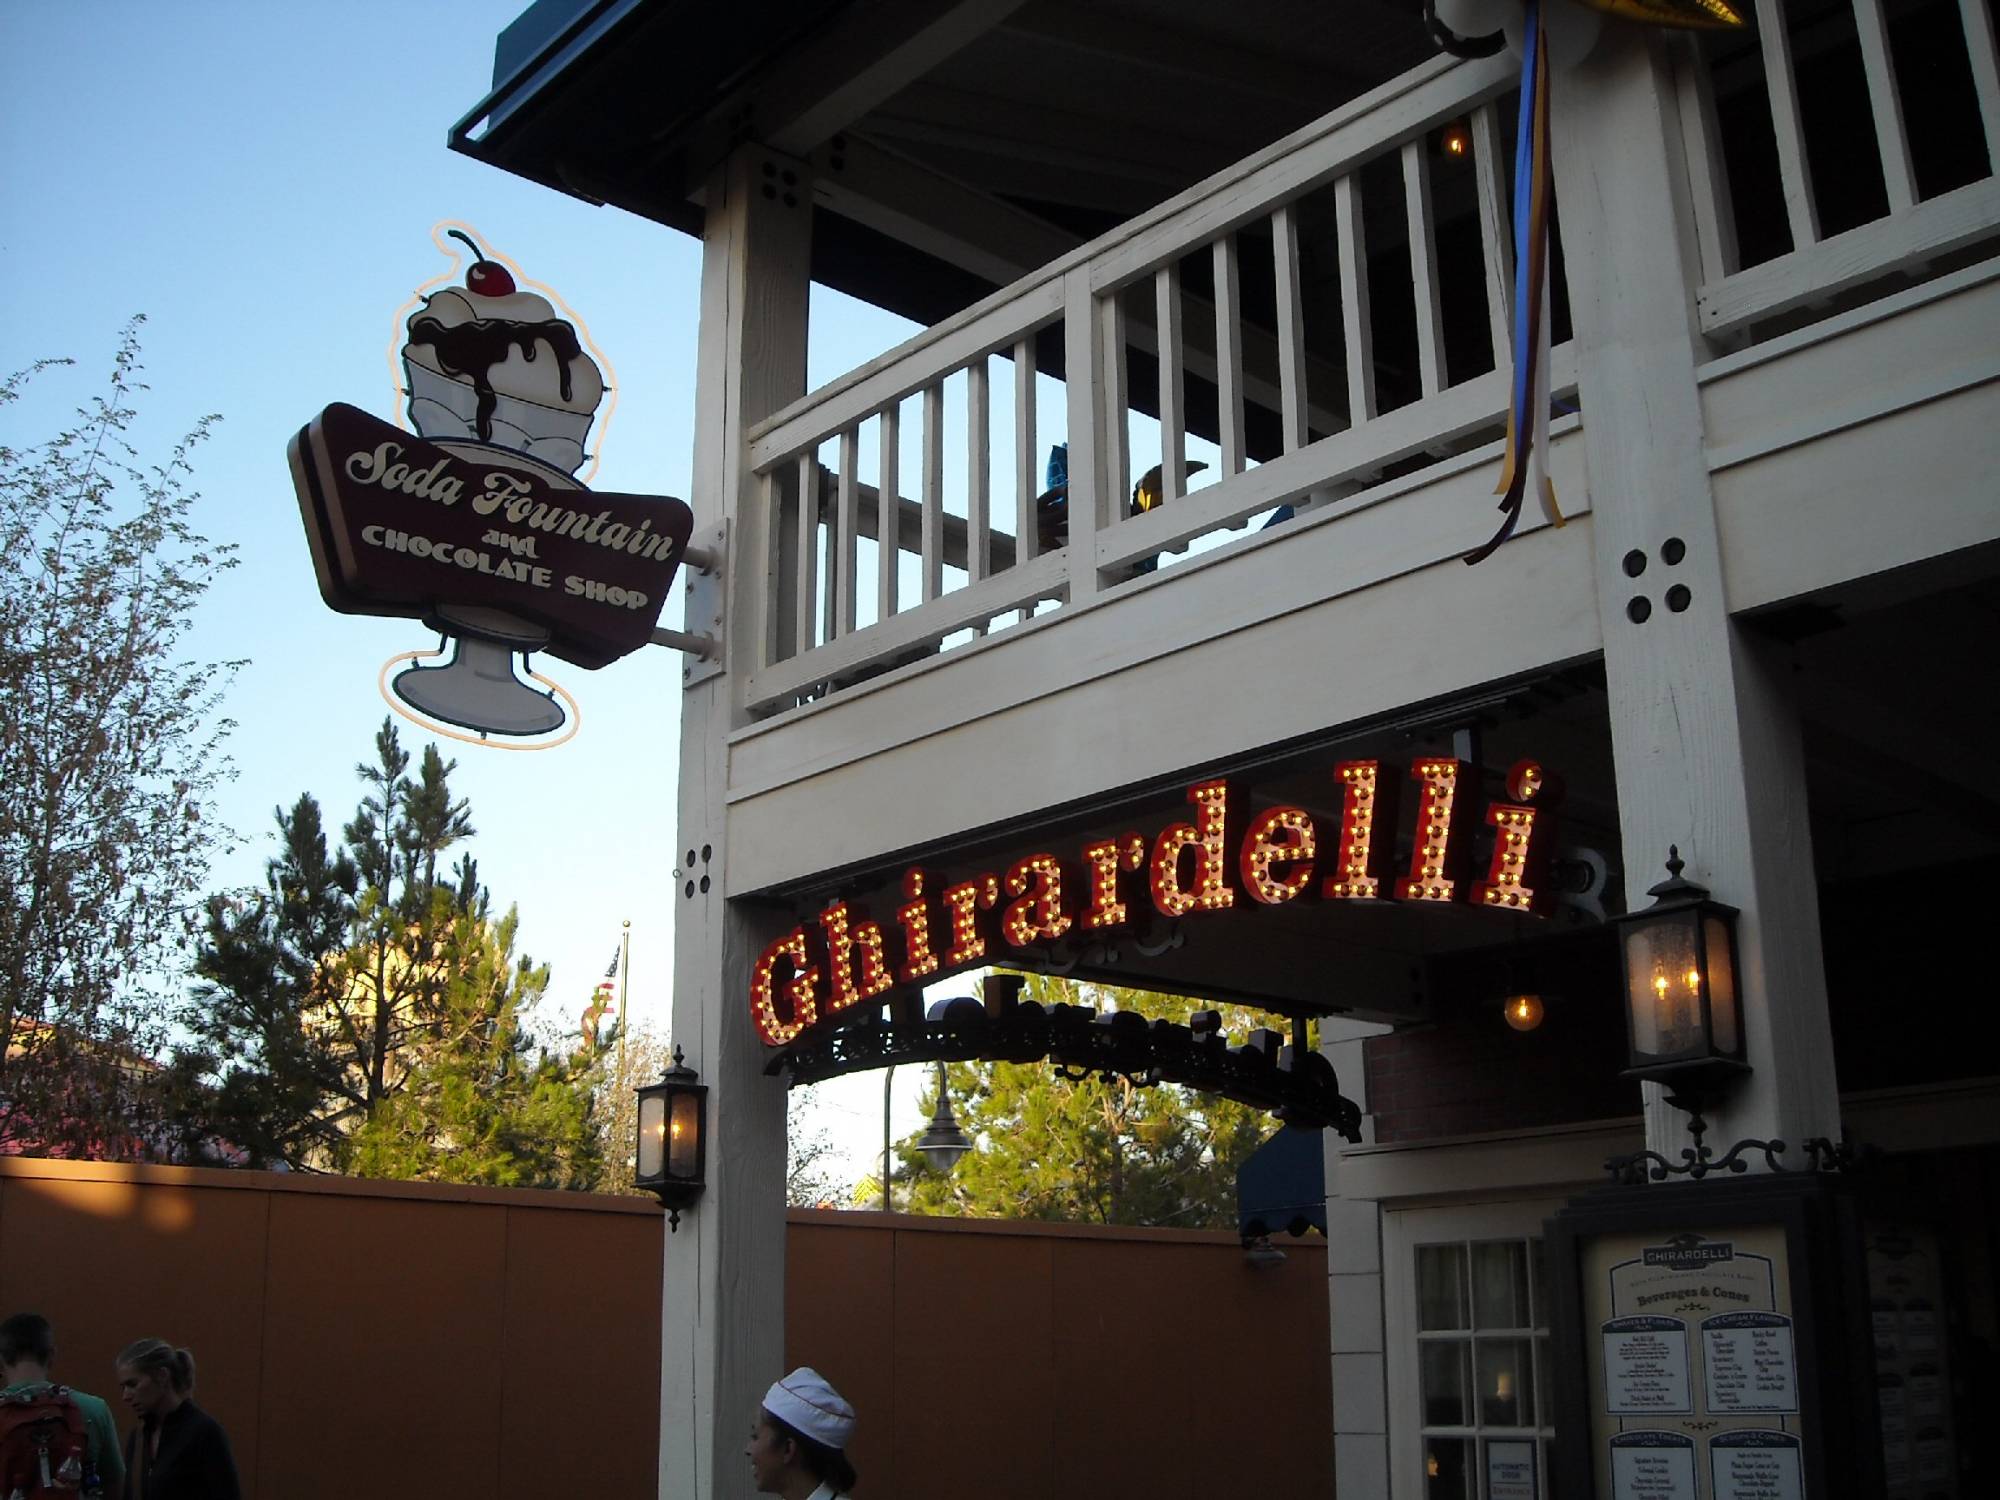 Indulge in a chocolate treat from the Ghirardelli Factory Store at Disney California Adventure |PassPorter.com